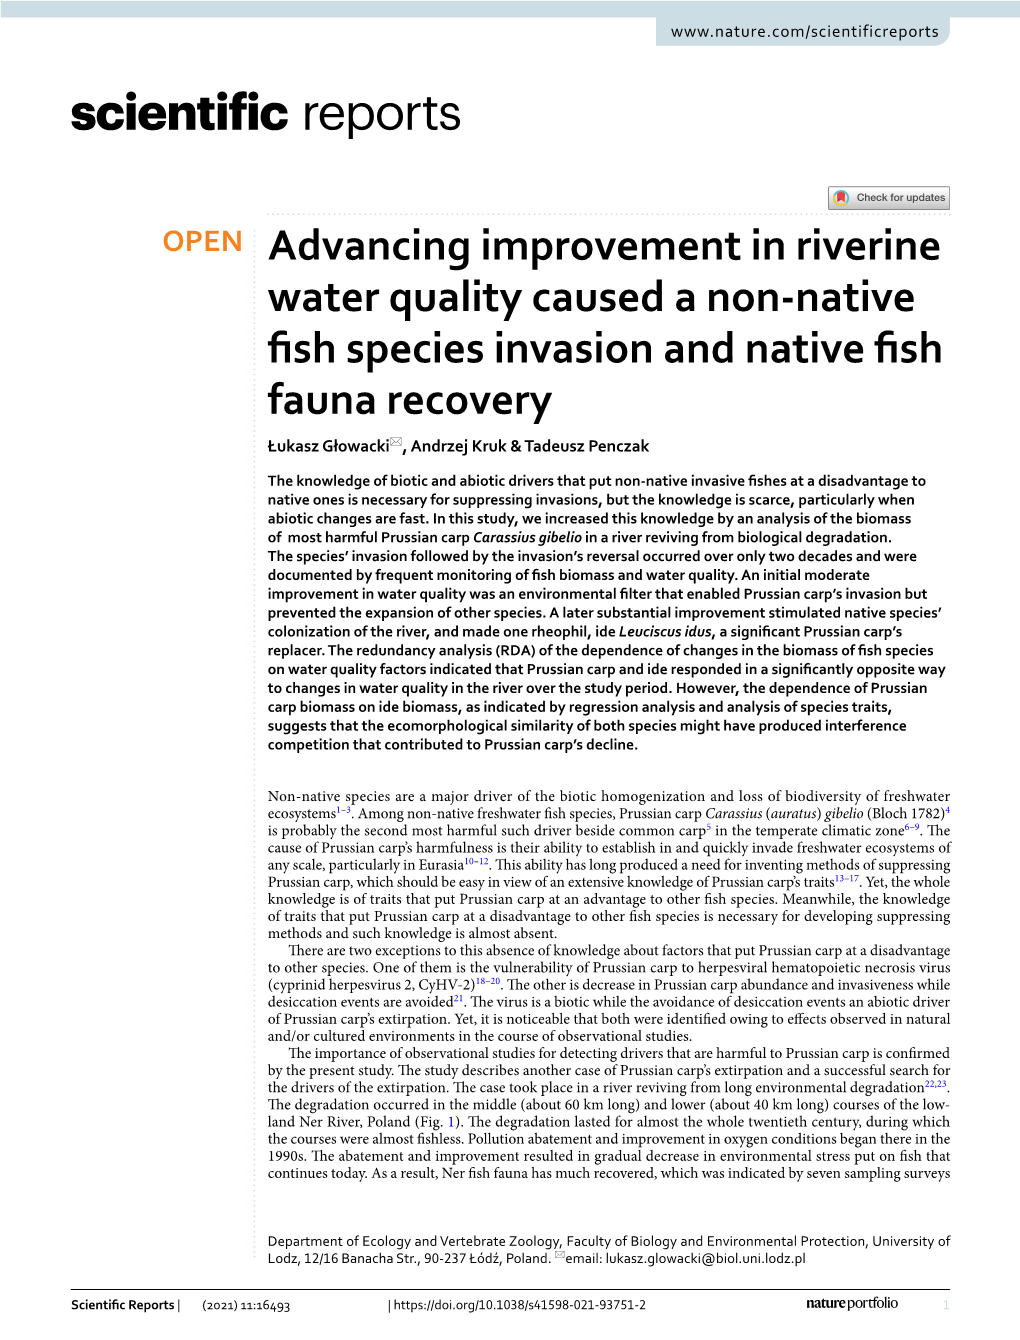 Advancing Improvement in Riverine Water Quality Caused a Non-Native Fish Species Invasion and Native Fish Fauna Recovery